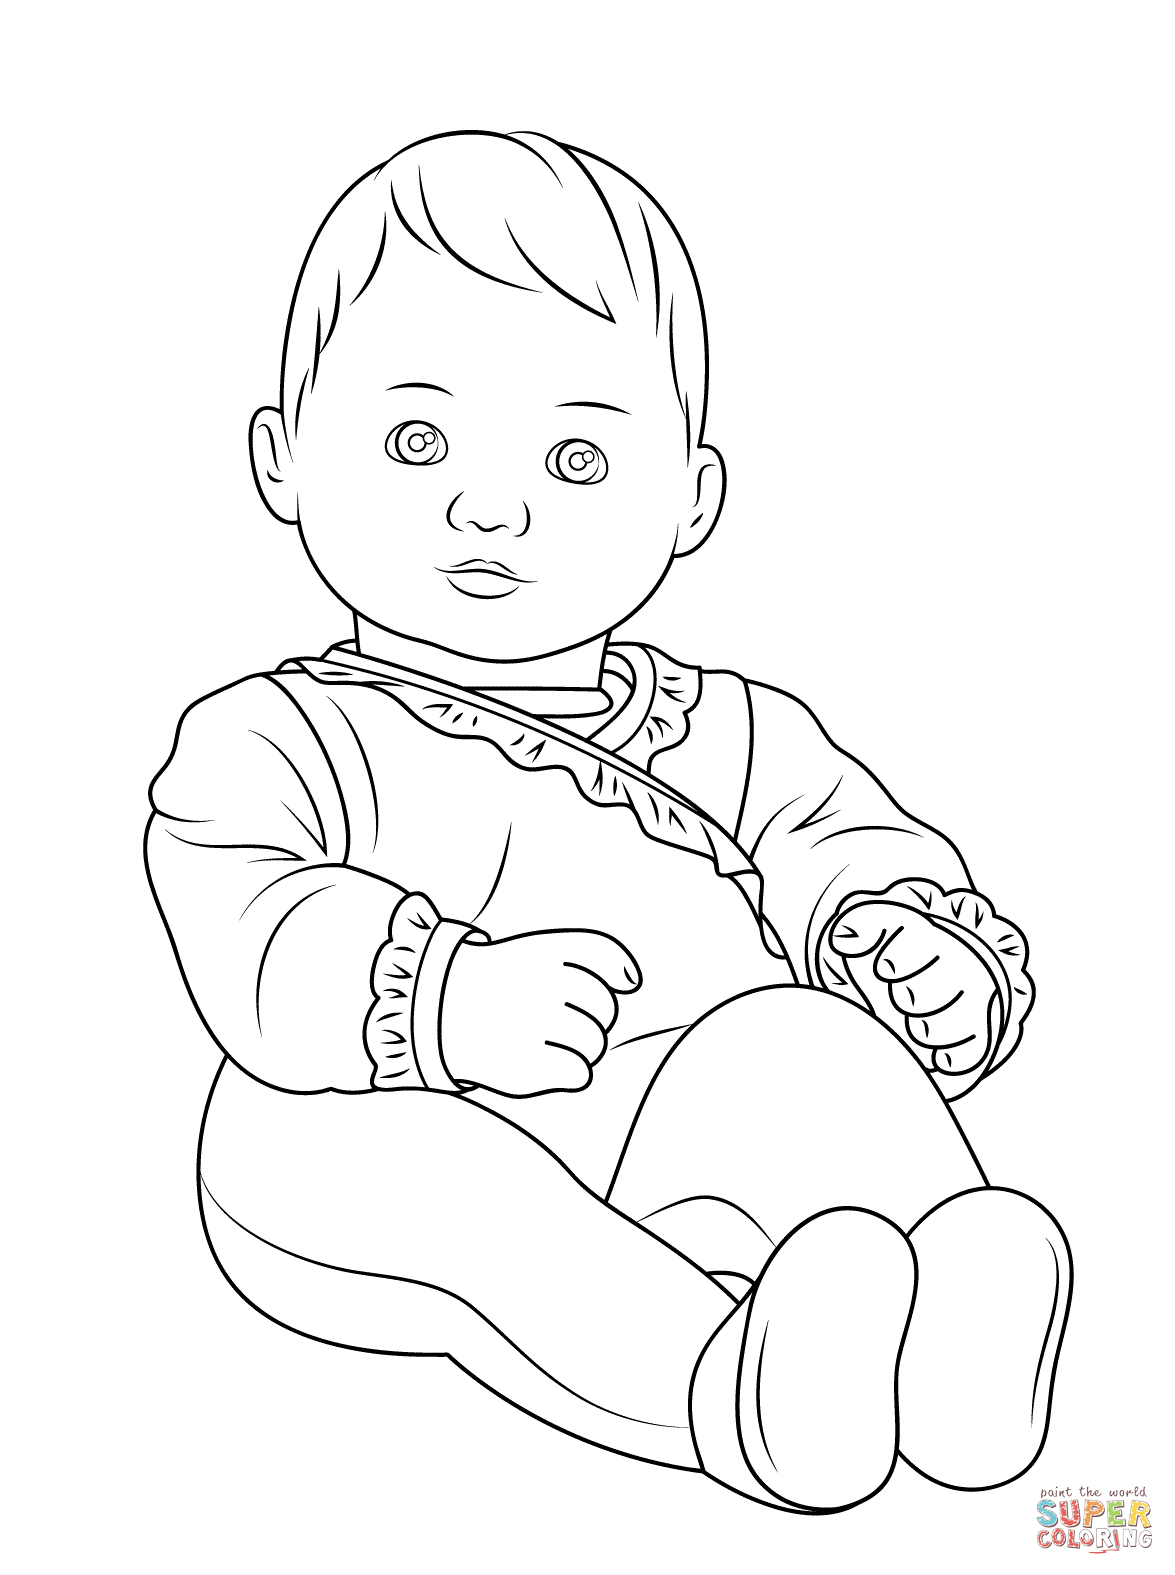 American girl bitty baby coloring page free printable coloring pages